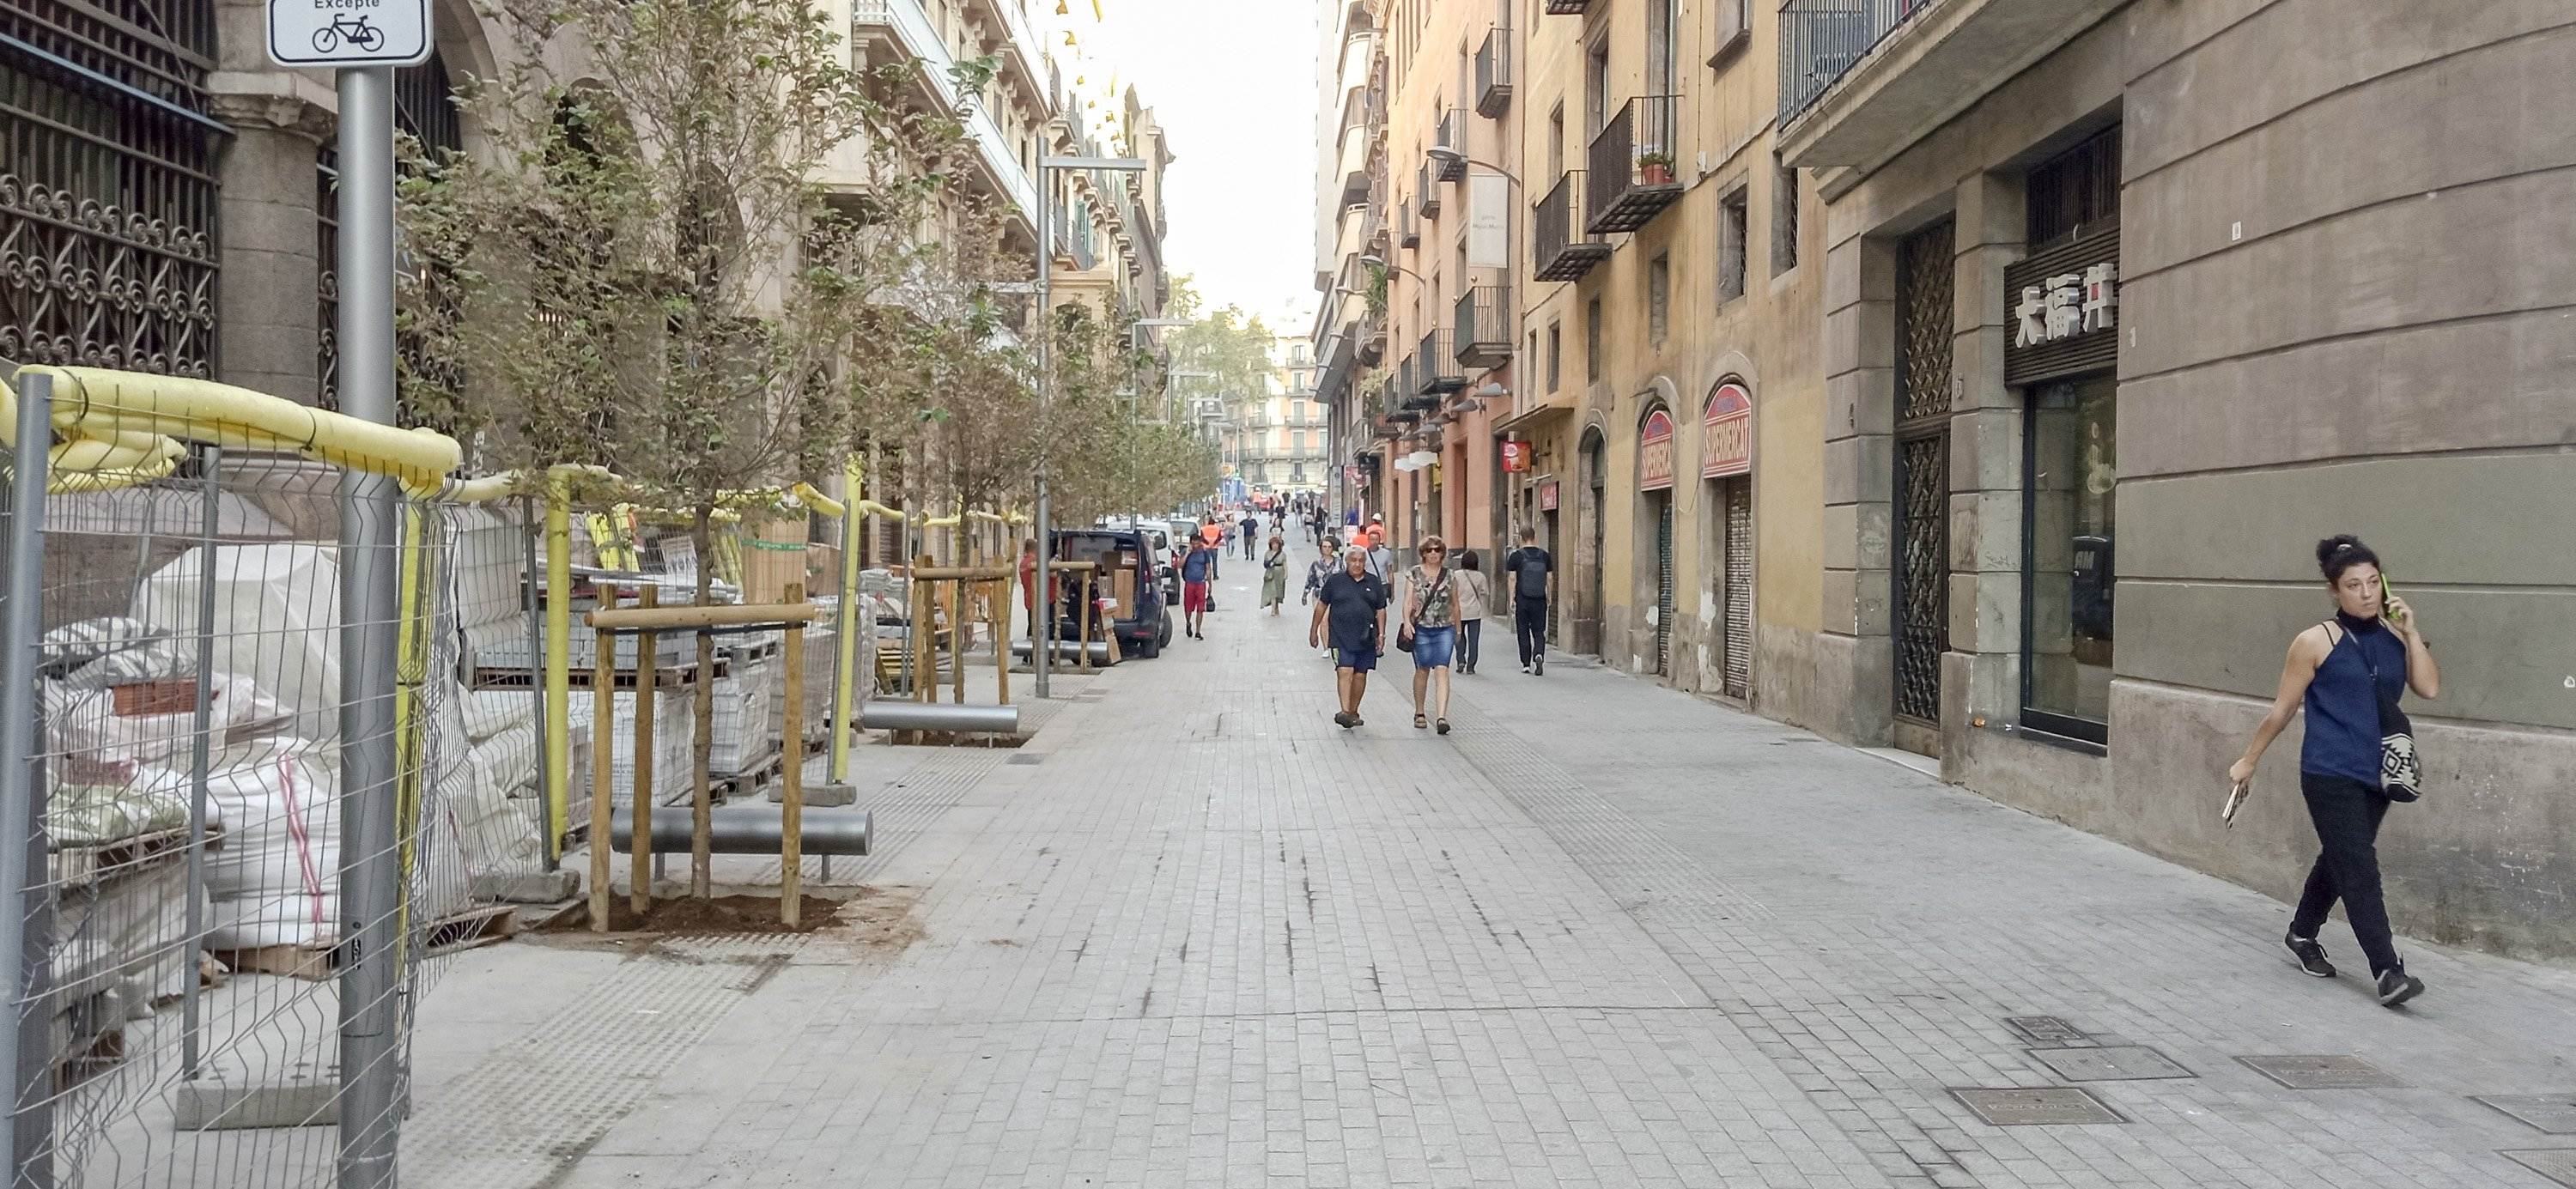 Carrer Jonqueres, the green axis that no-one was expecting